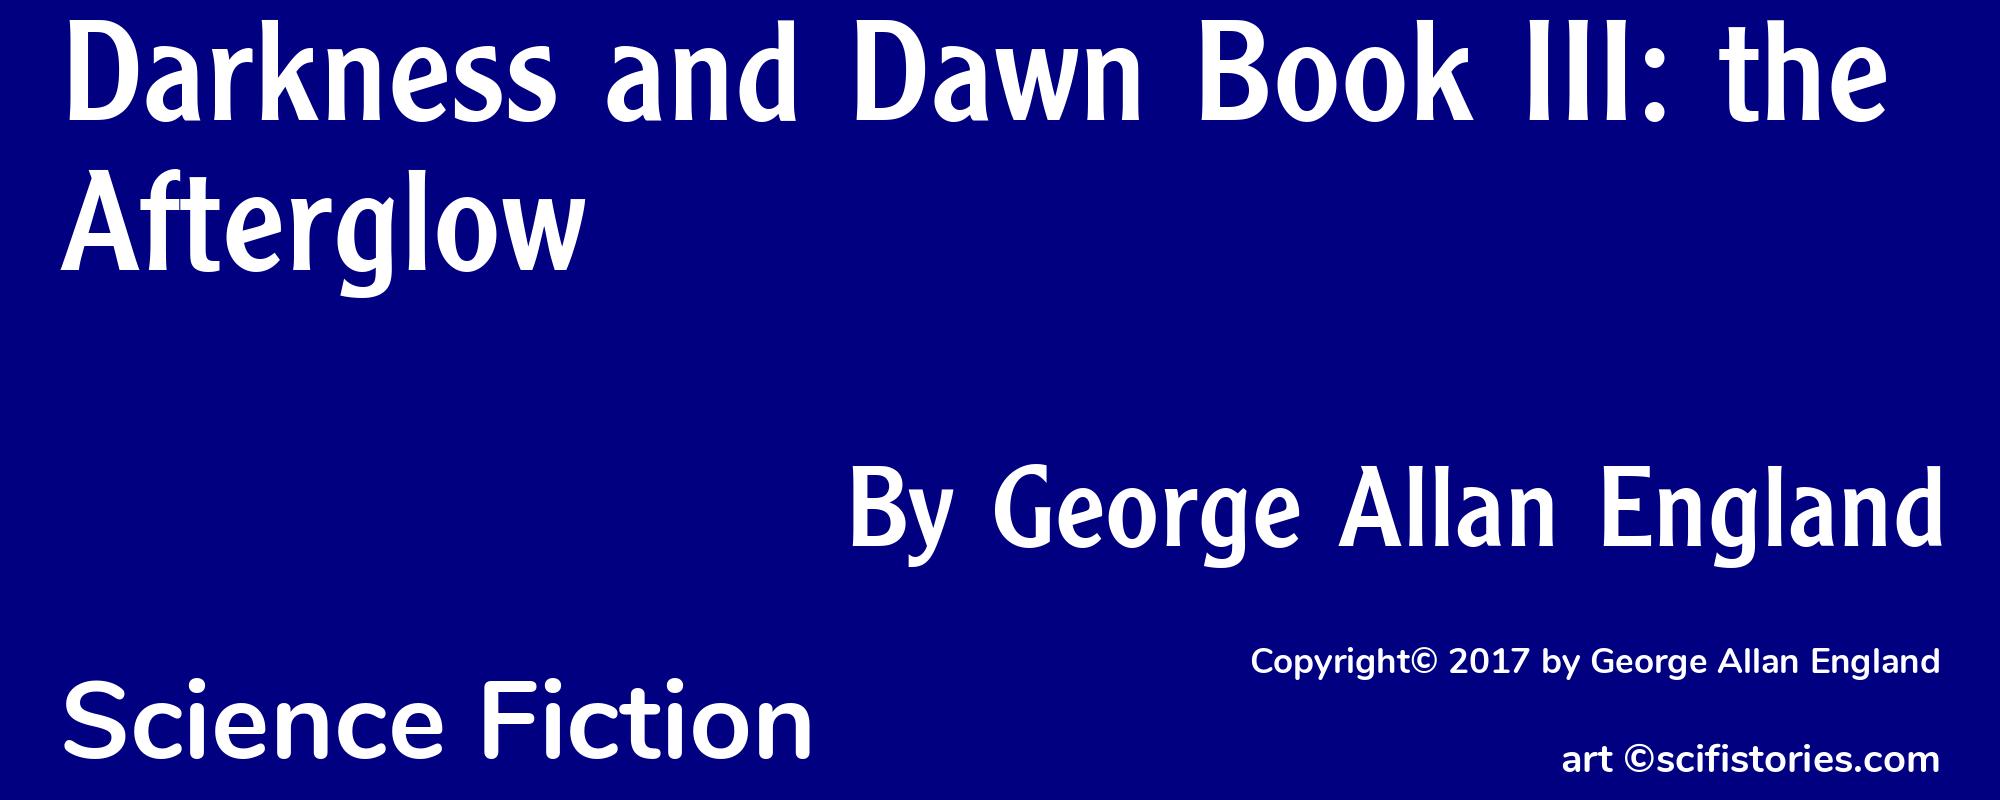 Darkness and Dawn Book III: the Afterglow - Cover